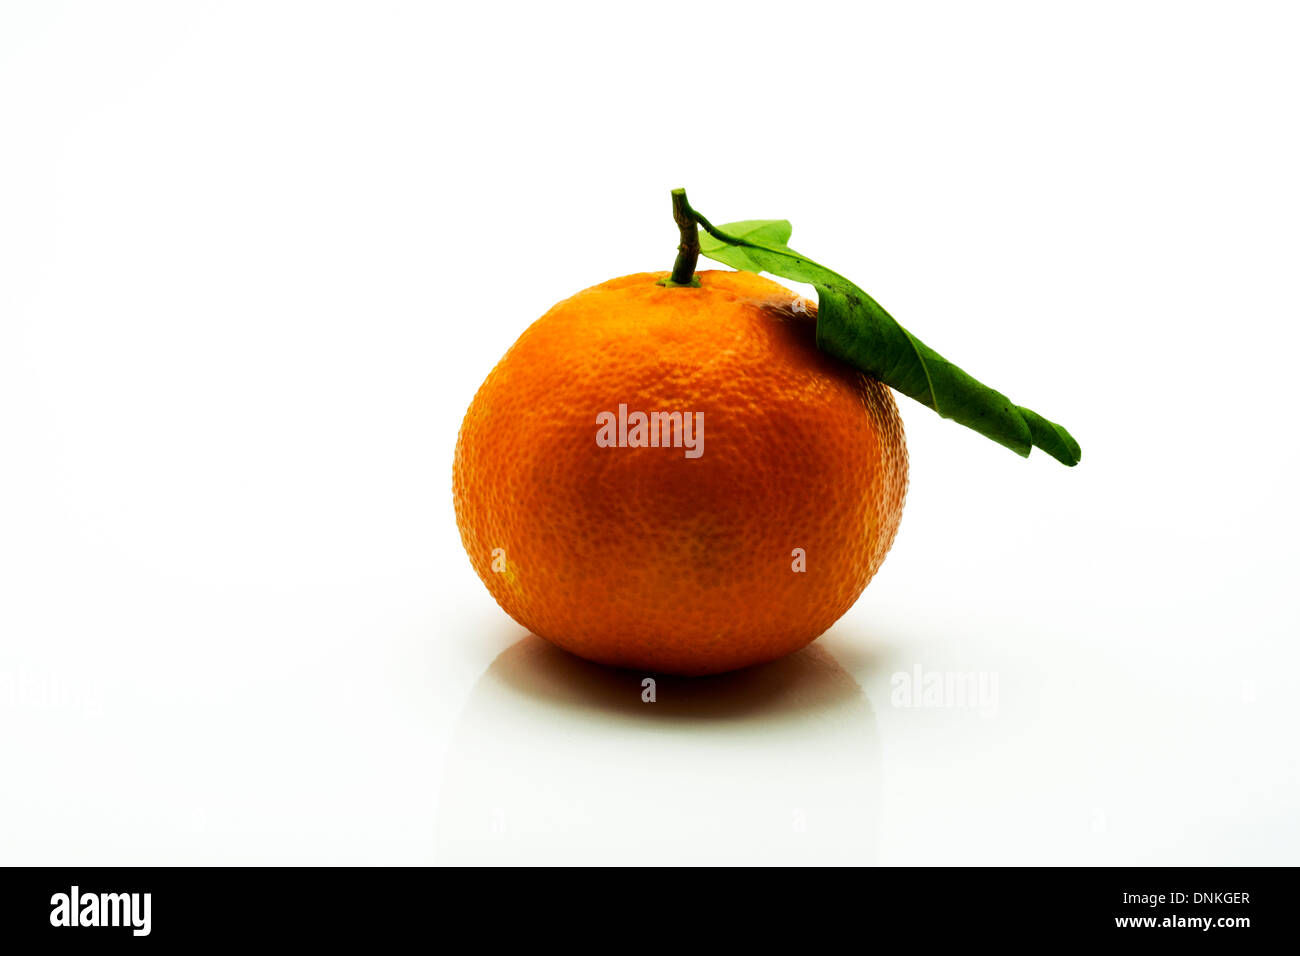 Clementine orange one single food fruit cut out white background copy space Stock Photo